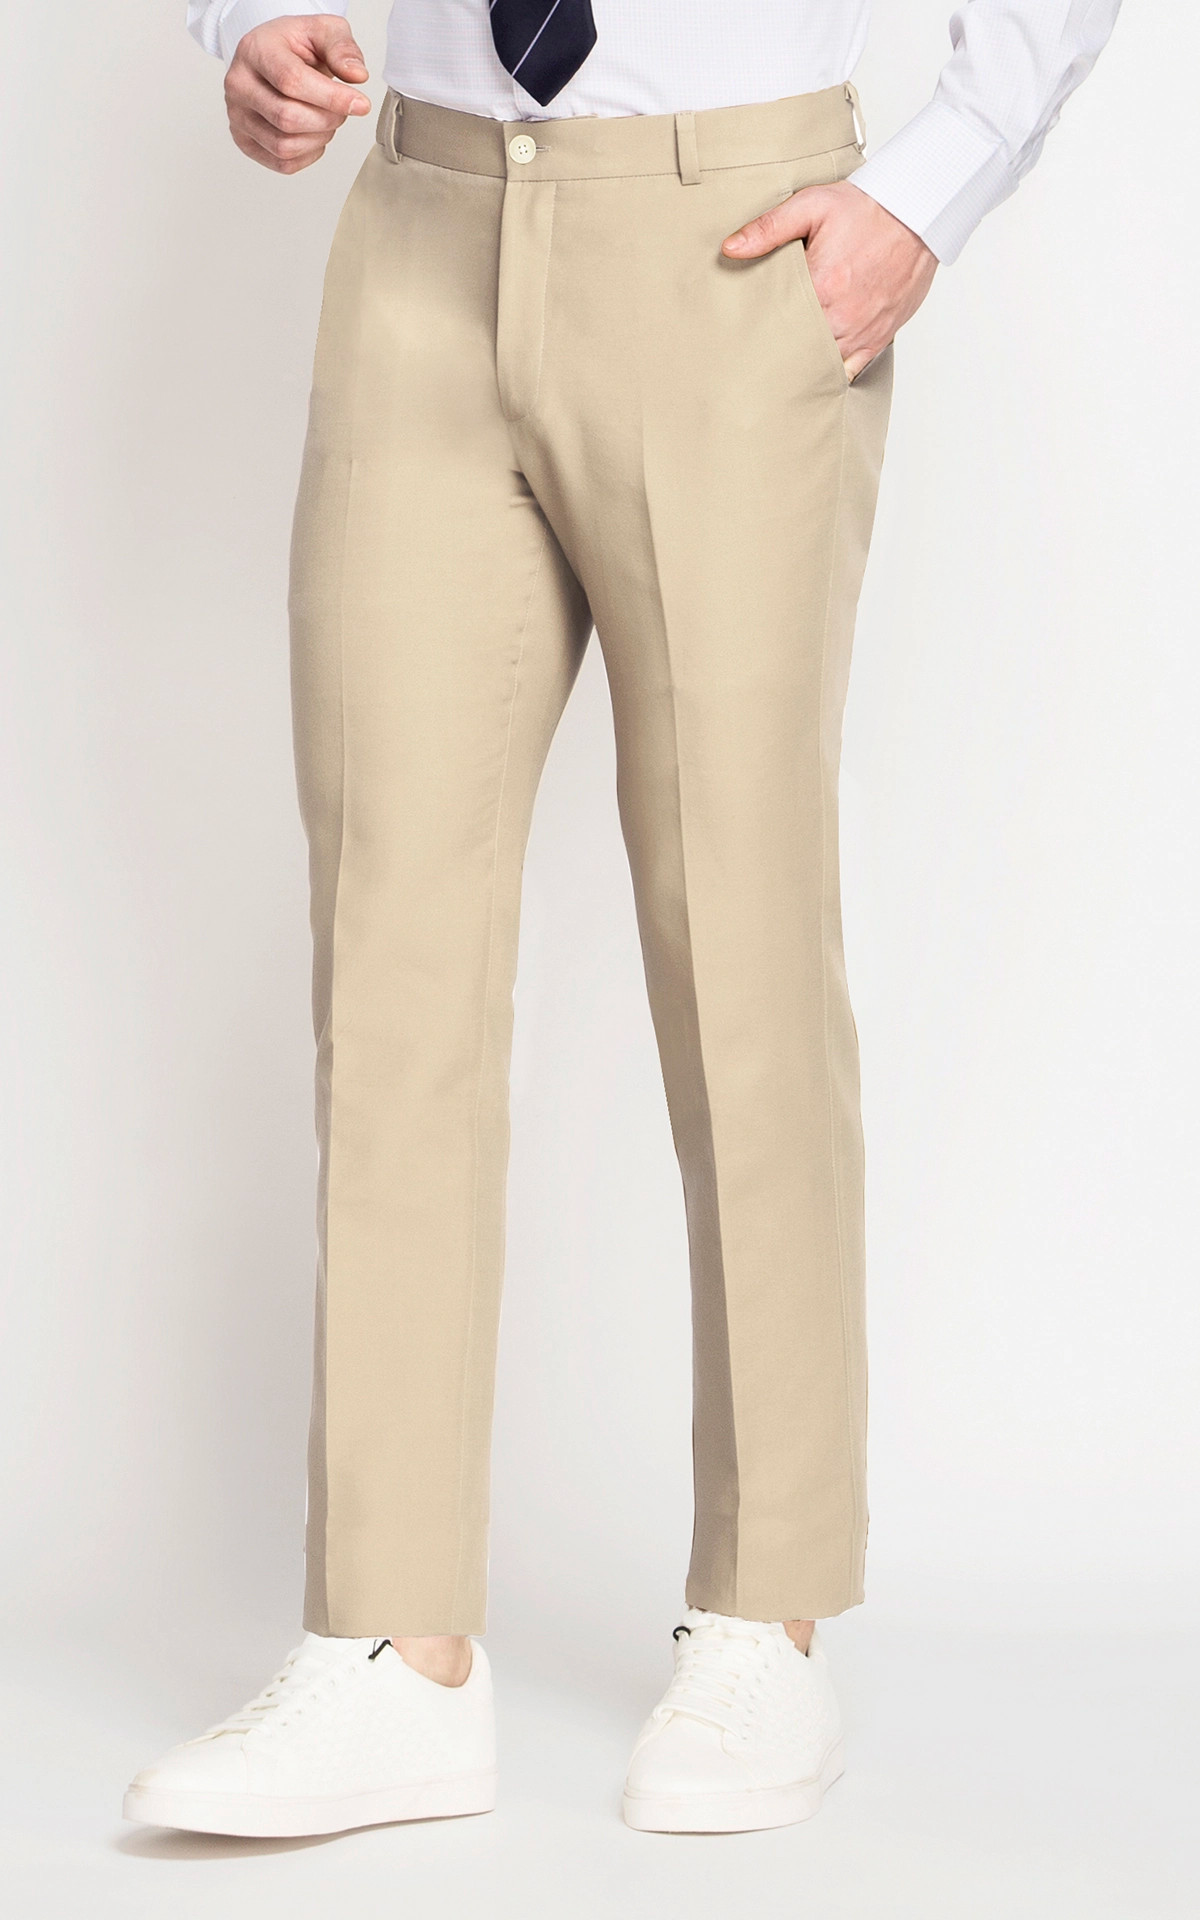 COLLUSION slim formal pants in neutral - part of a set | ASOS